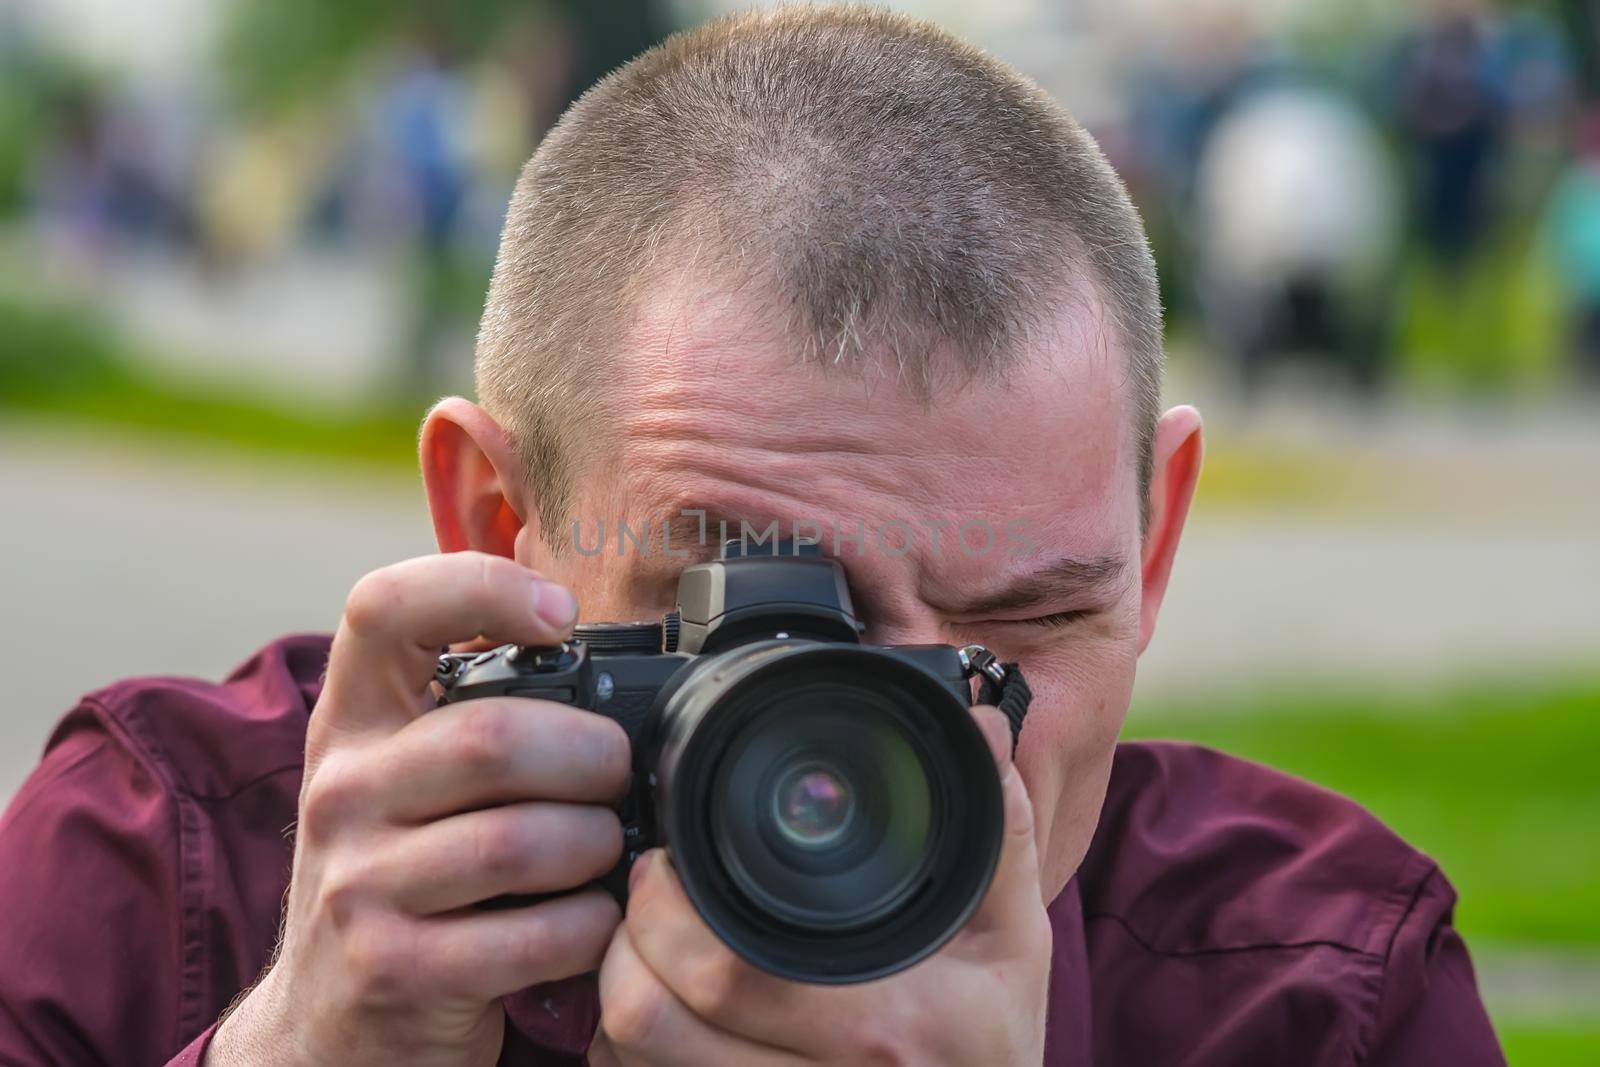 Close up portrait of photographer during the process of shooting work on camera outdoors